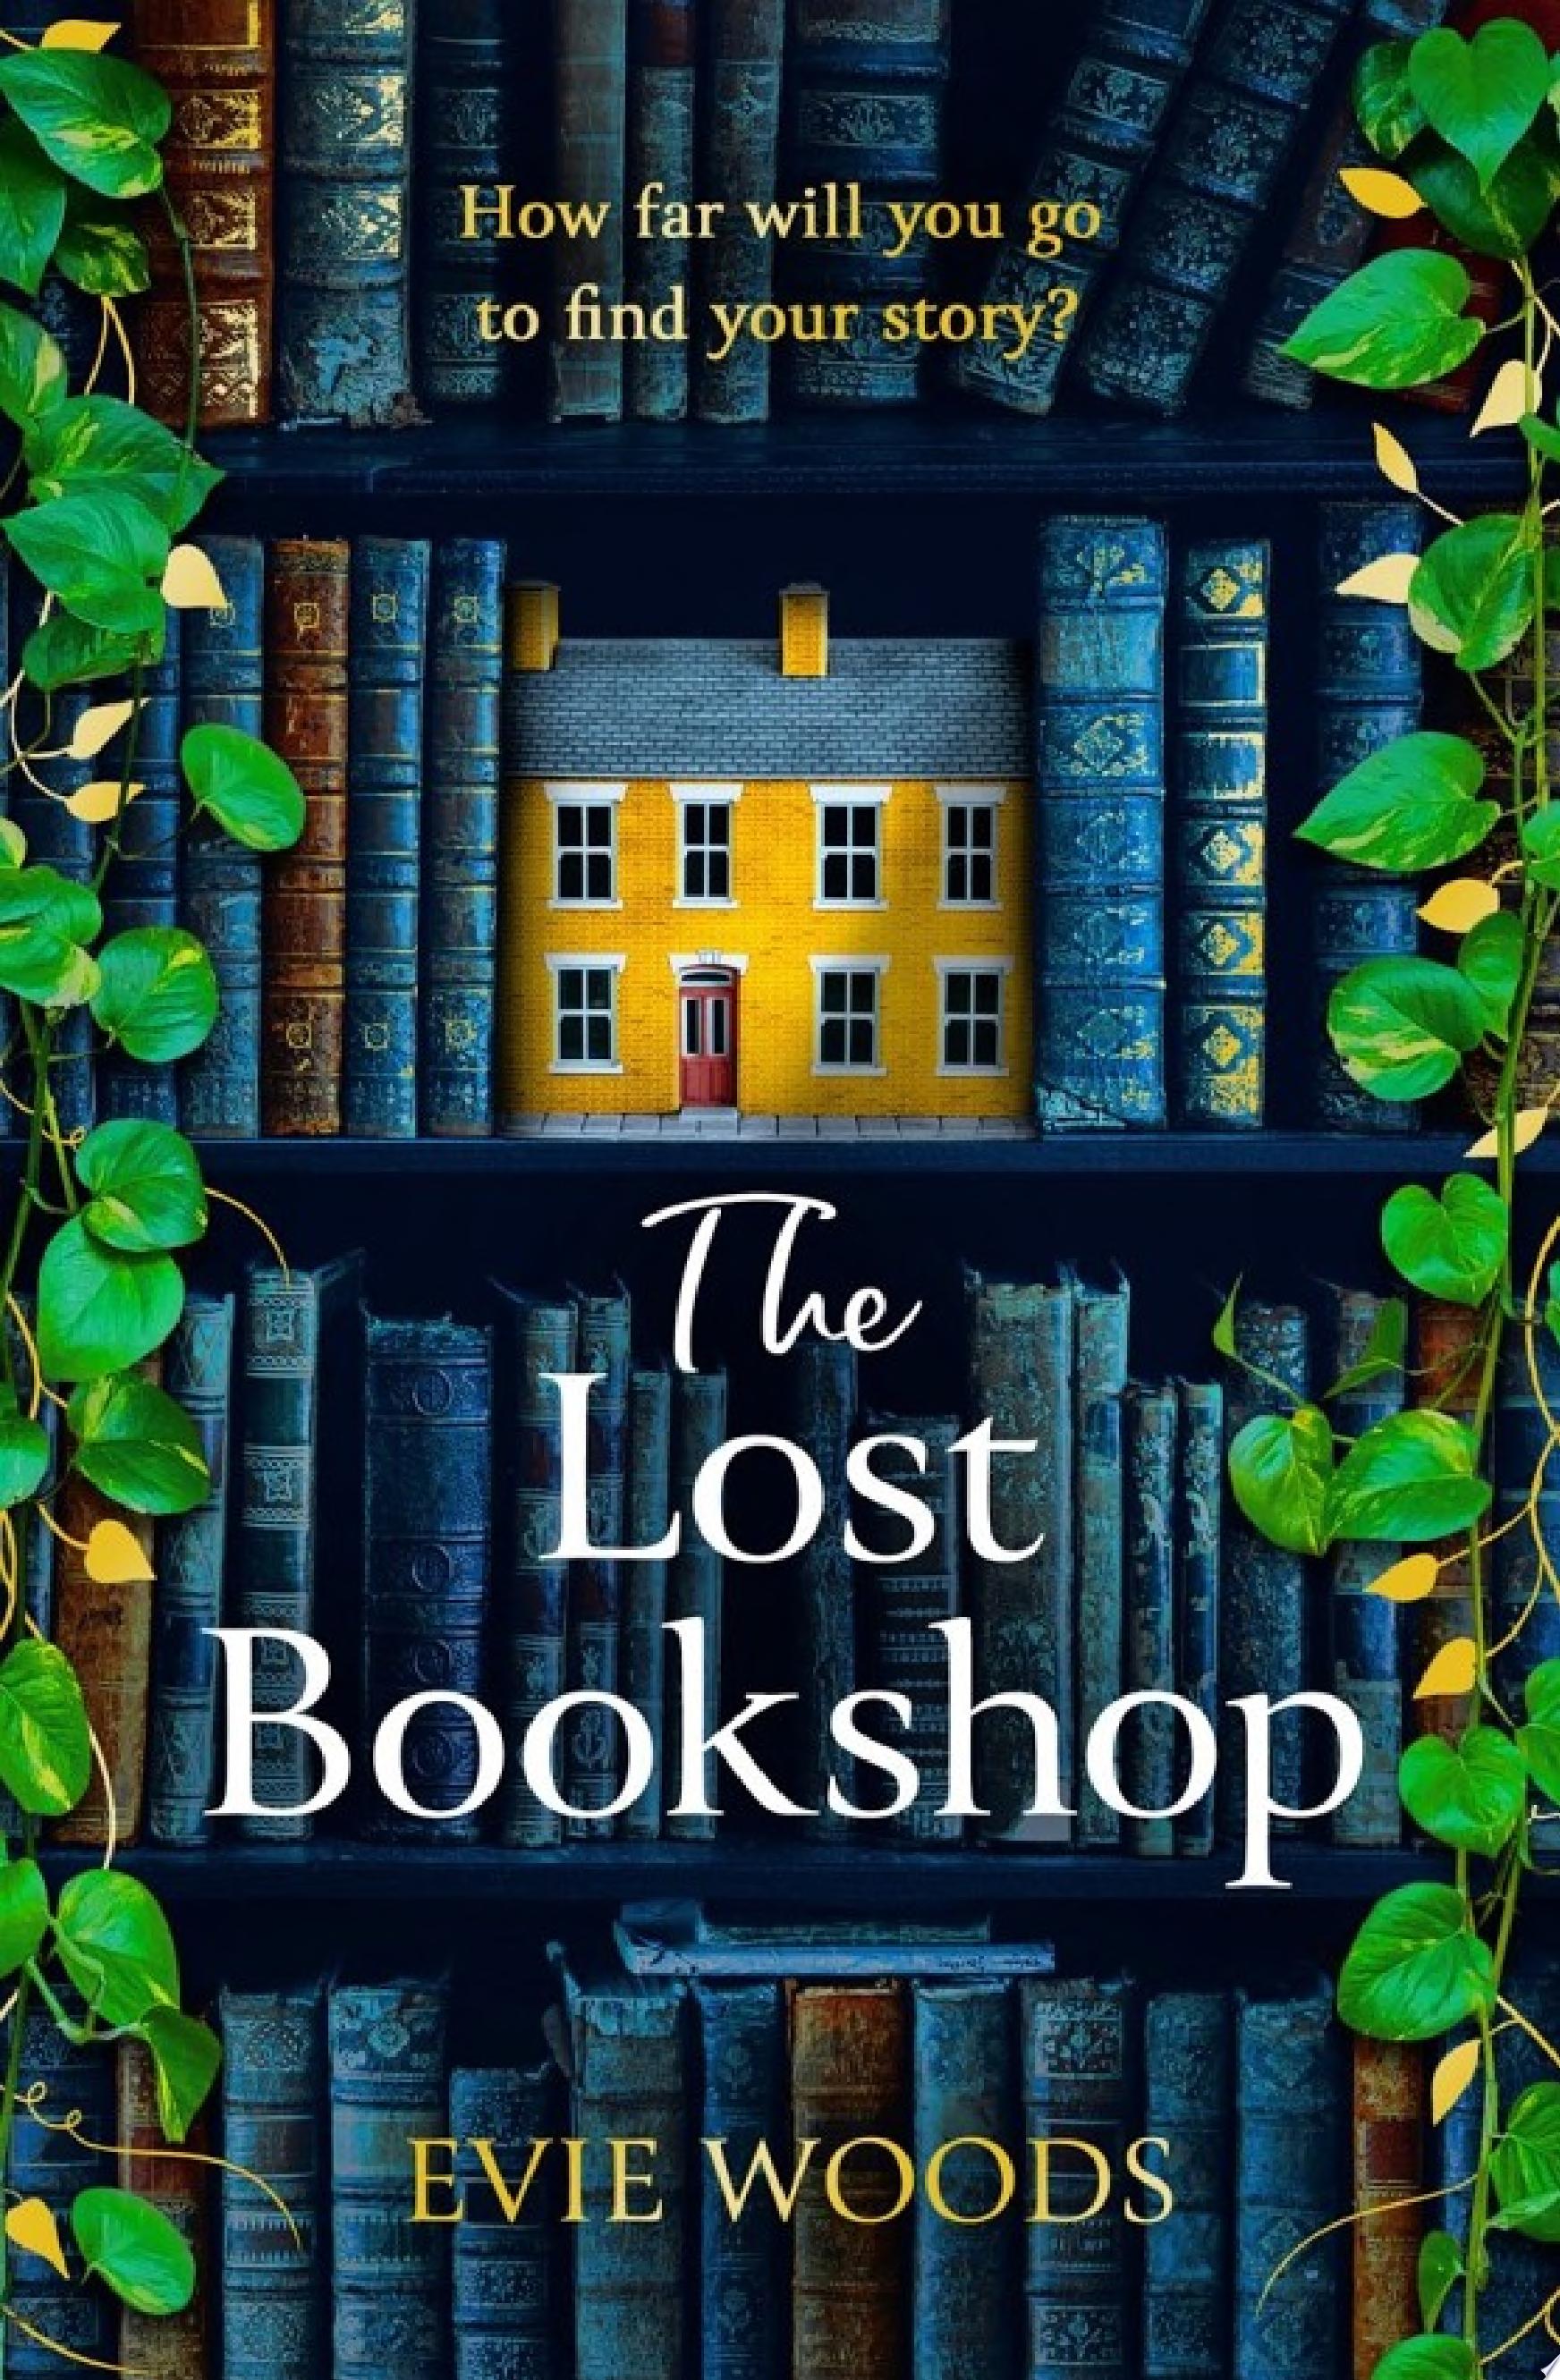 Image for "The Lost Bookshop"